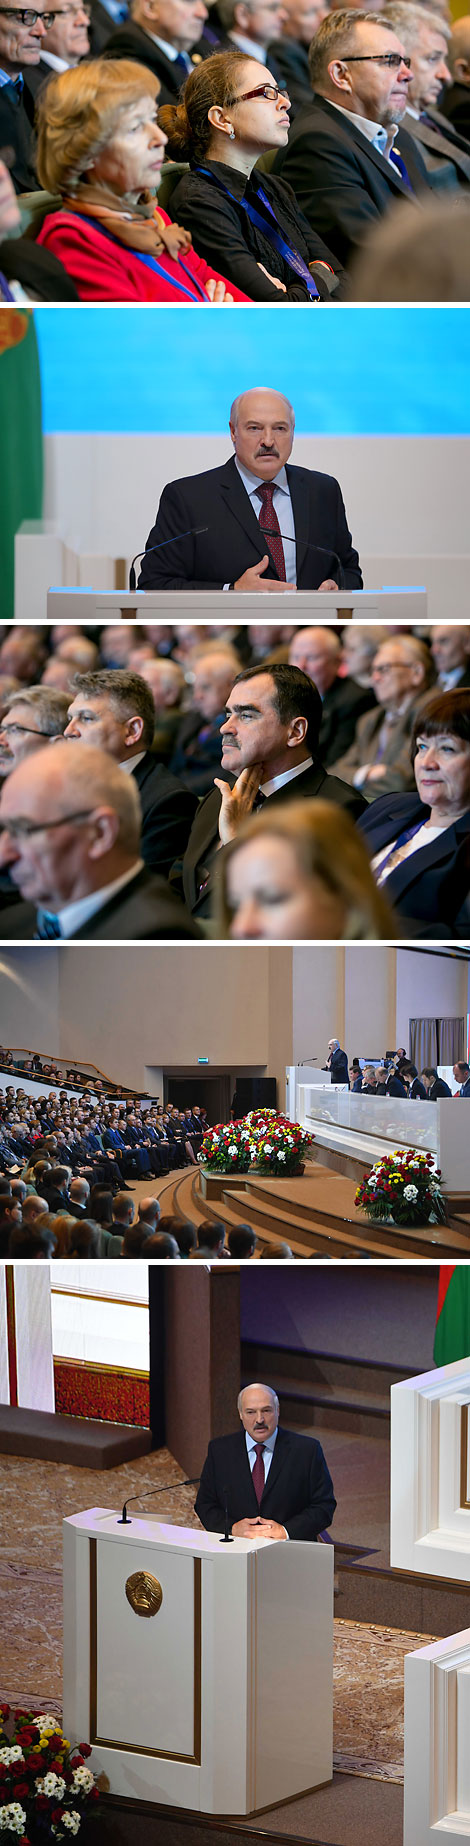 Plenary session of the Second Congress of Scientists of Belarus